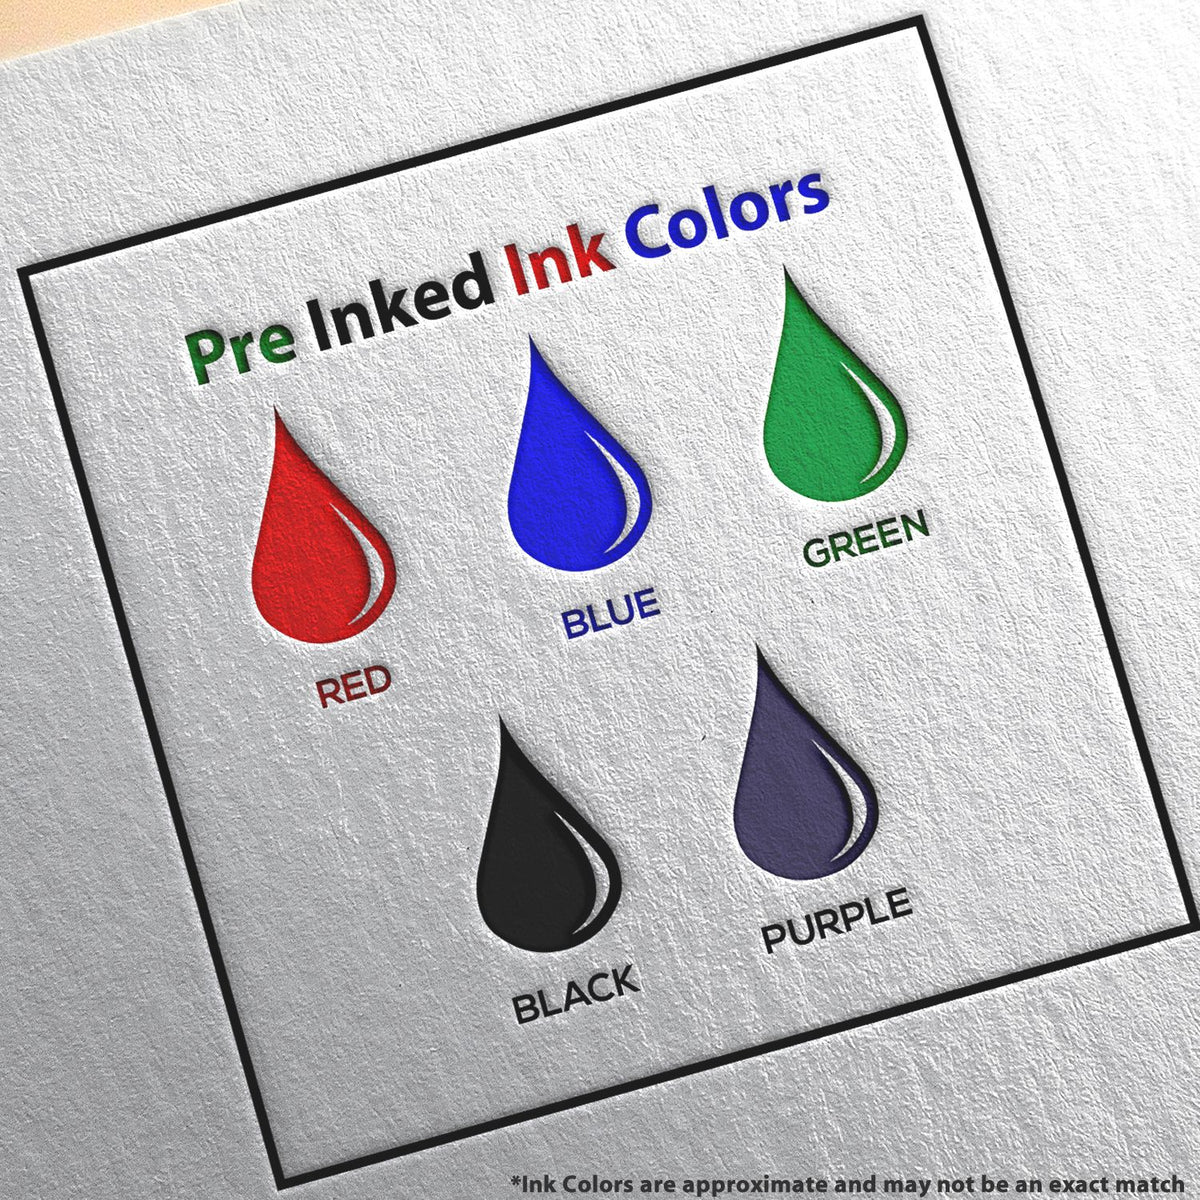 A picture showing the different ink colors or hues available for the MaxLight Premium Pre-Inked Texas State Seal Notarial Stamp product.